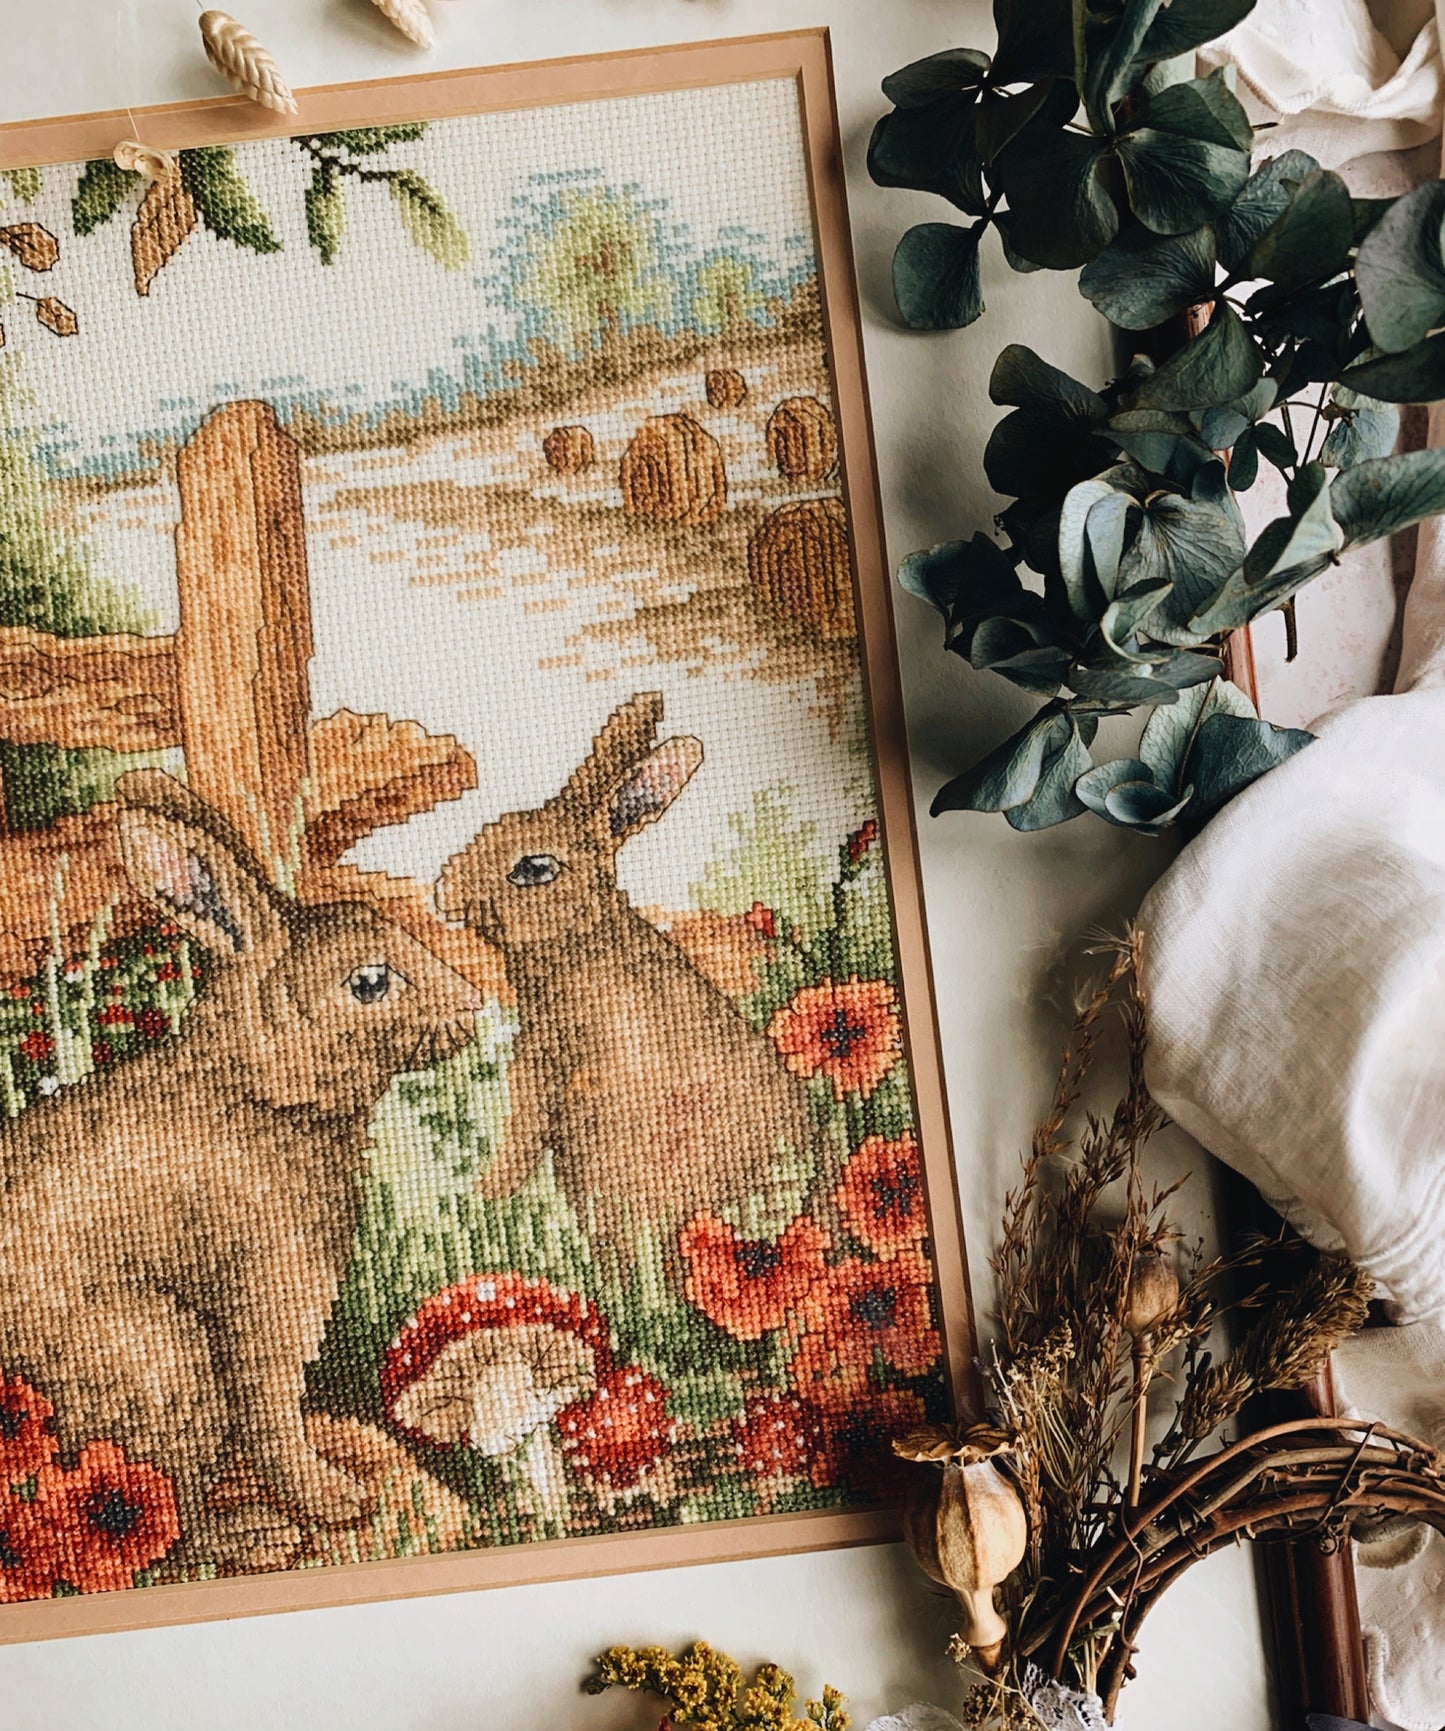 Large Vintage Rabbit Tapestry (needle point)  Framed (UK SHIPPING ONLY)